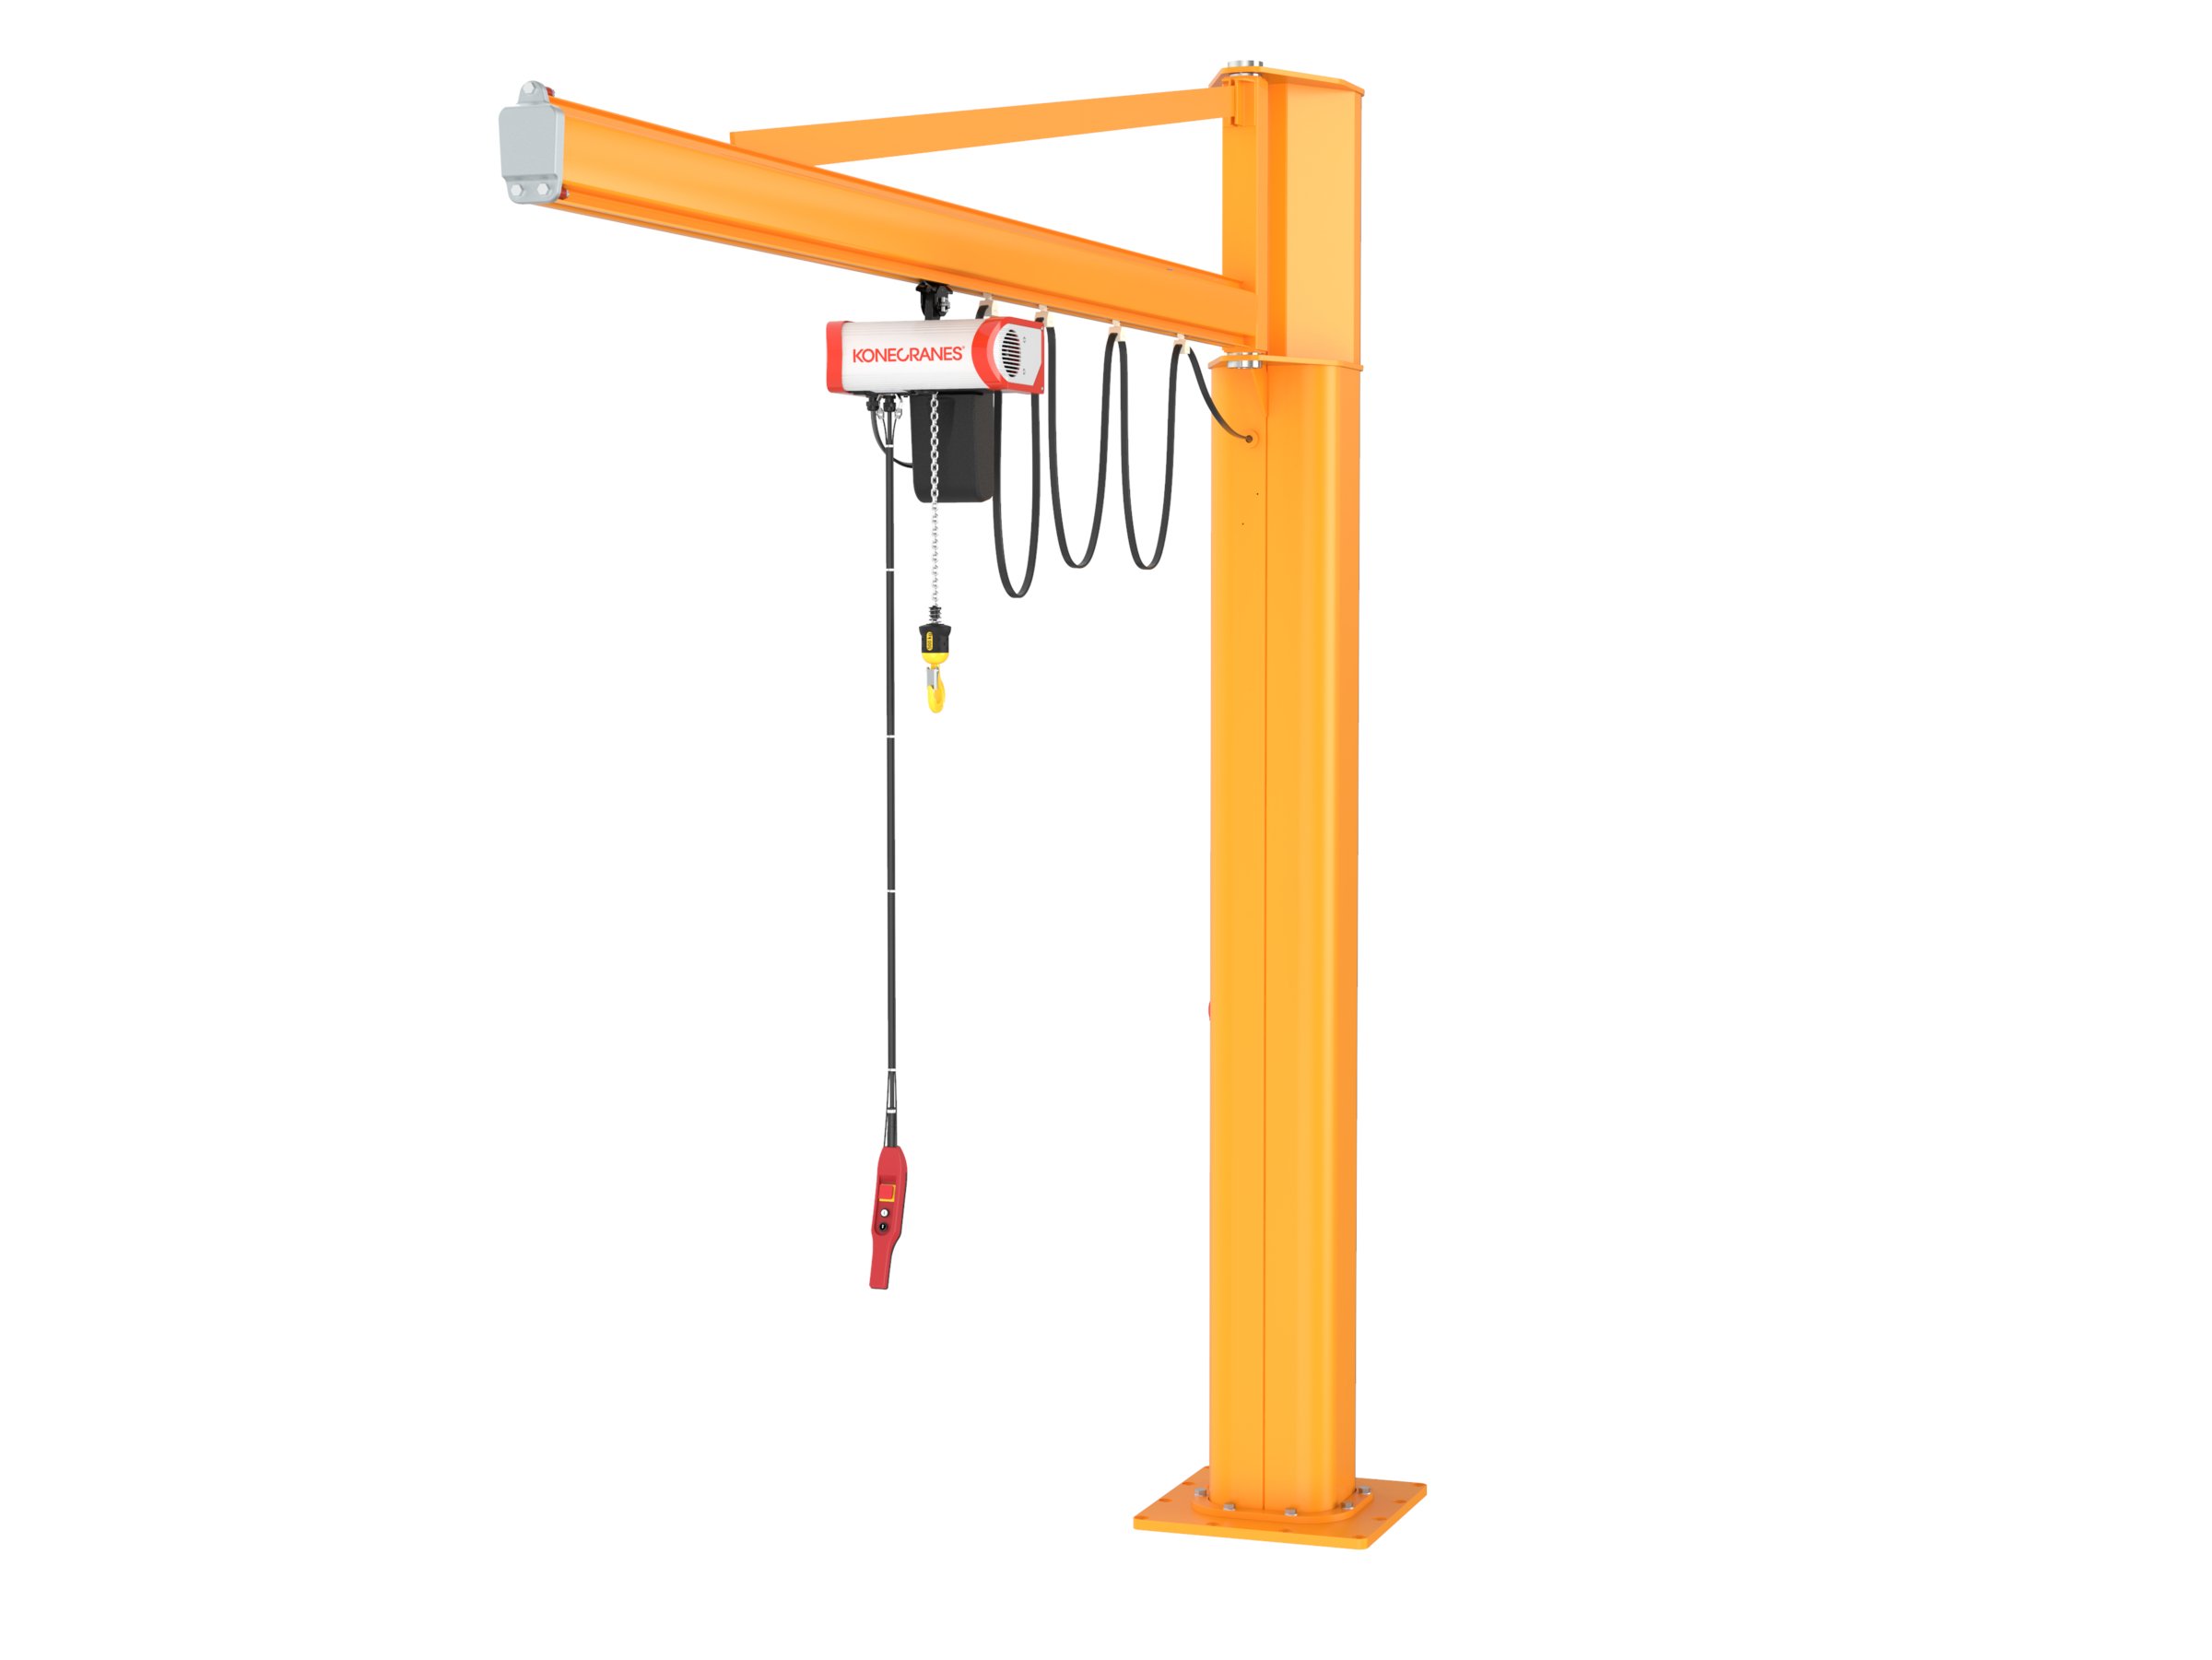 Jib Cranes: What Is It? Types of, Components, Uses